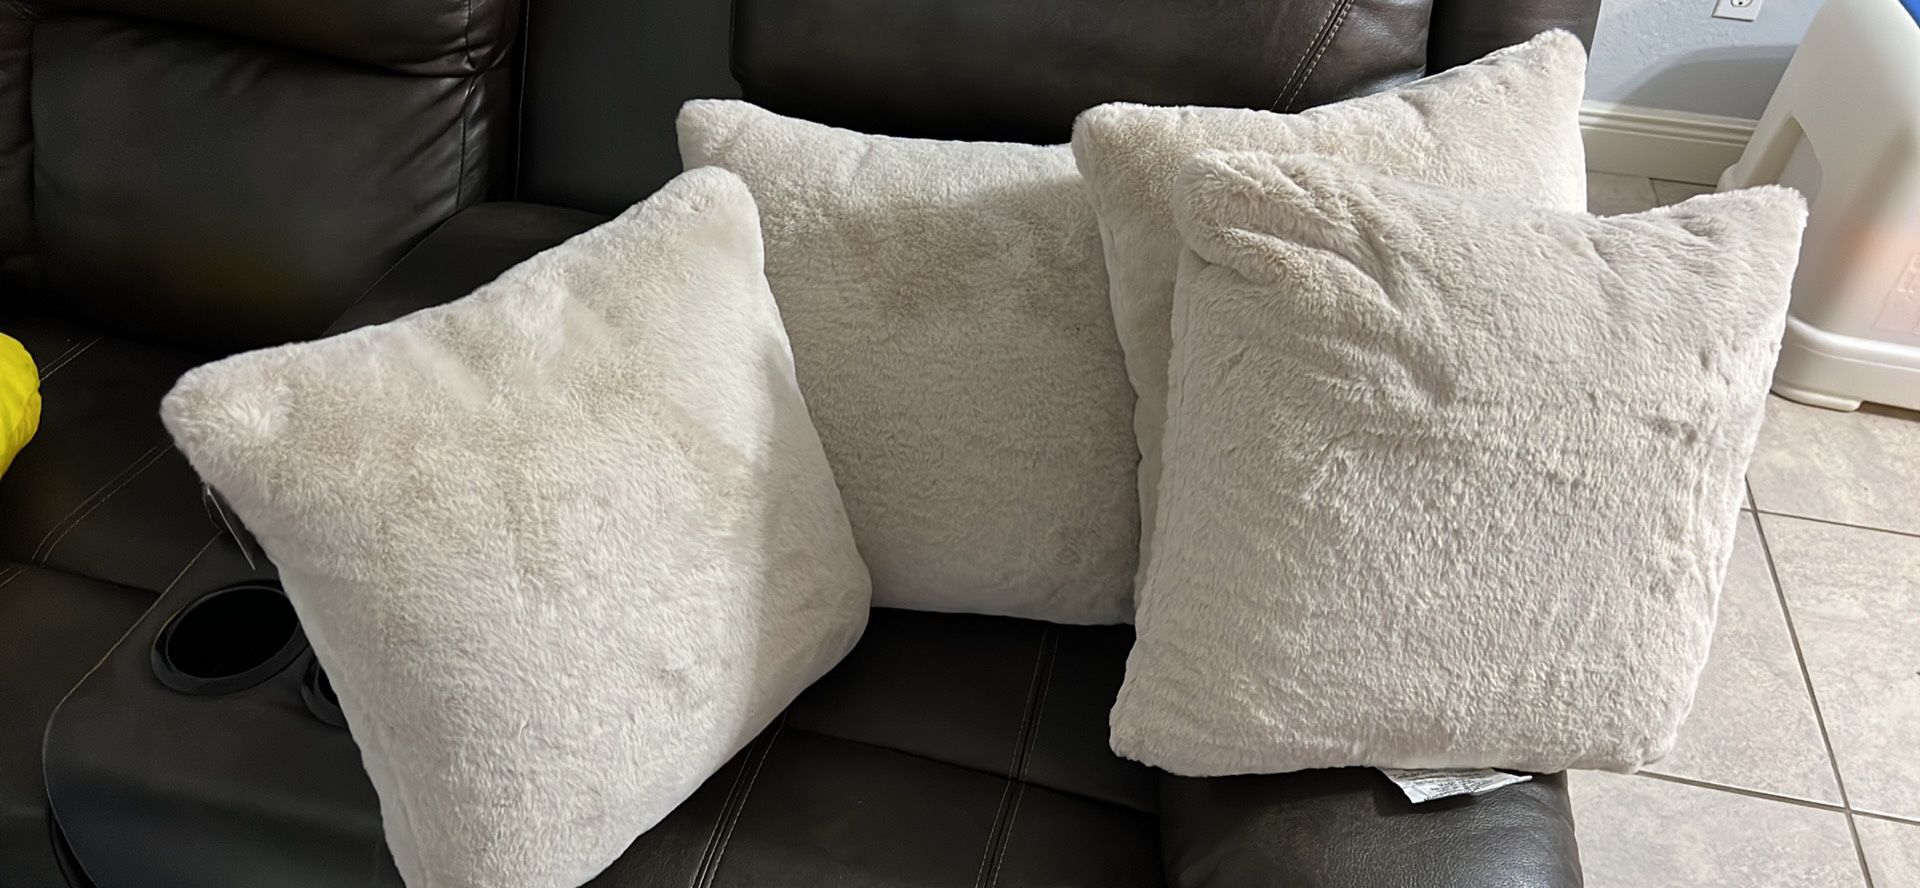 Brand New Cover Pillows For Couch Or Bed